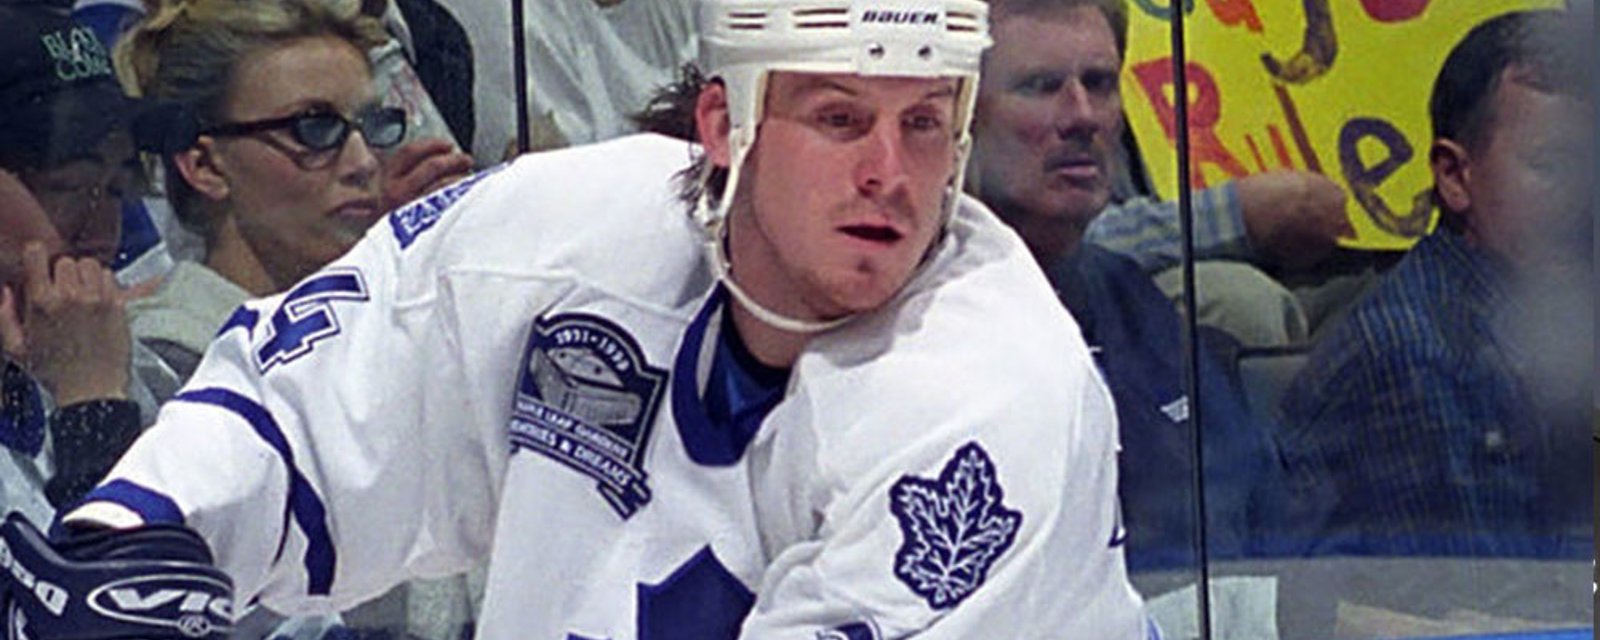 Former NHL defenseman Bryan Berard arrested on serious charges